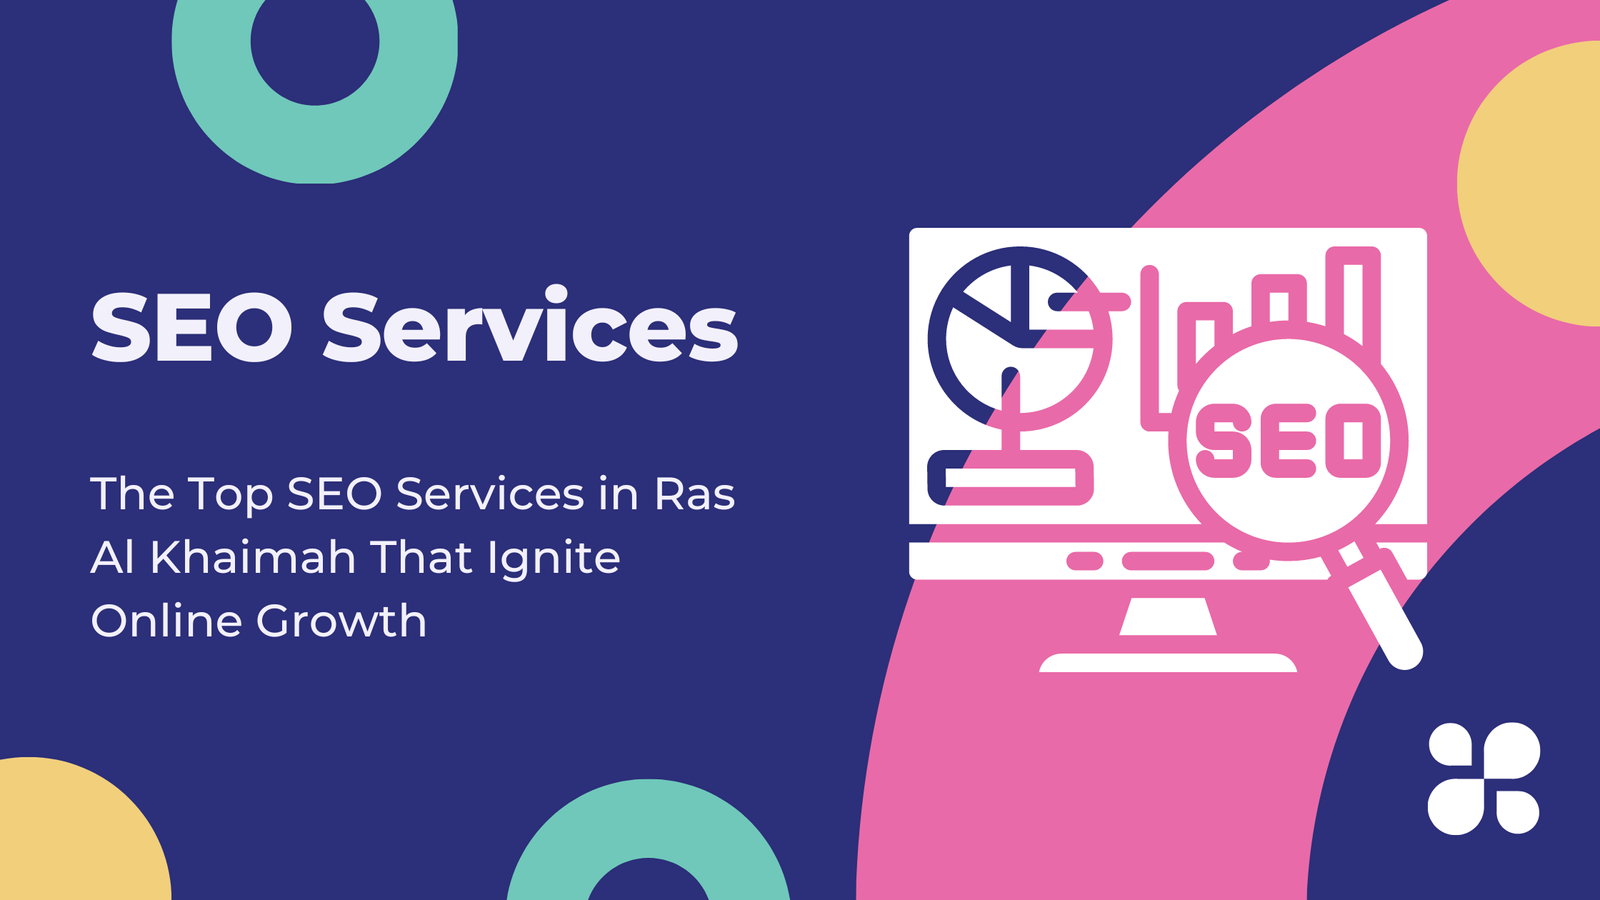 The Top SEO Services in Ras Al Khaimah That Ignite Online Growth